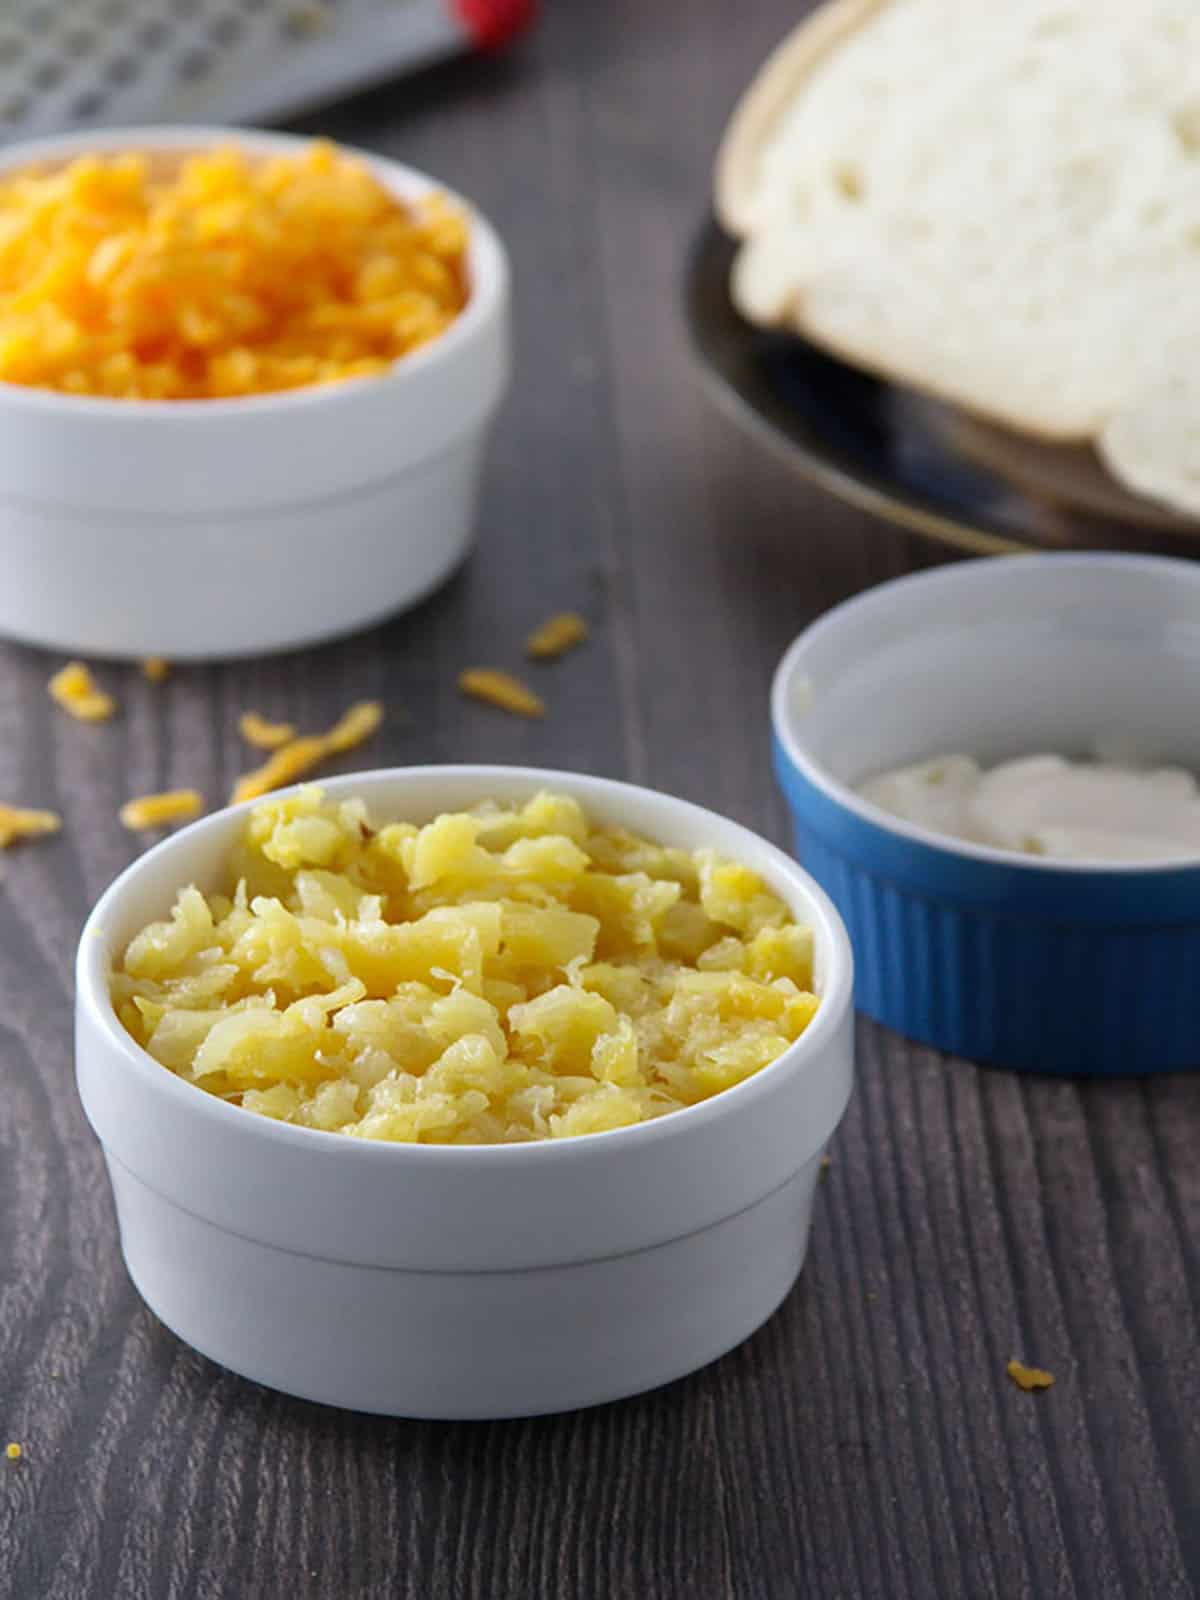 crushed pineapple, mayonnaise, shredded cheese in small bowls